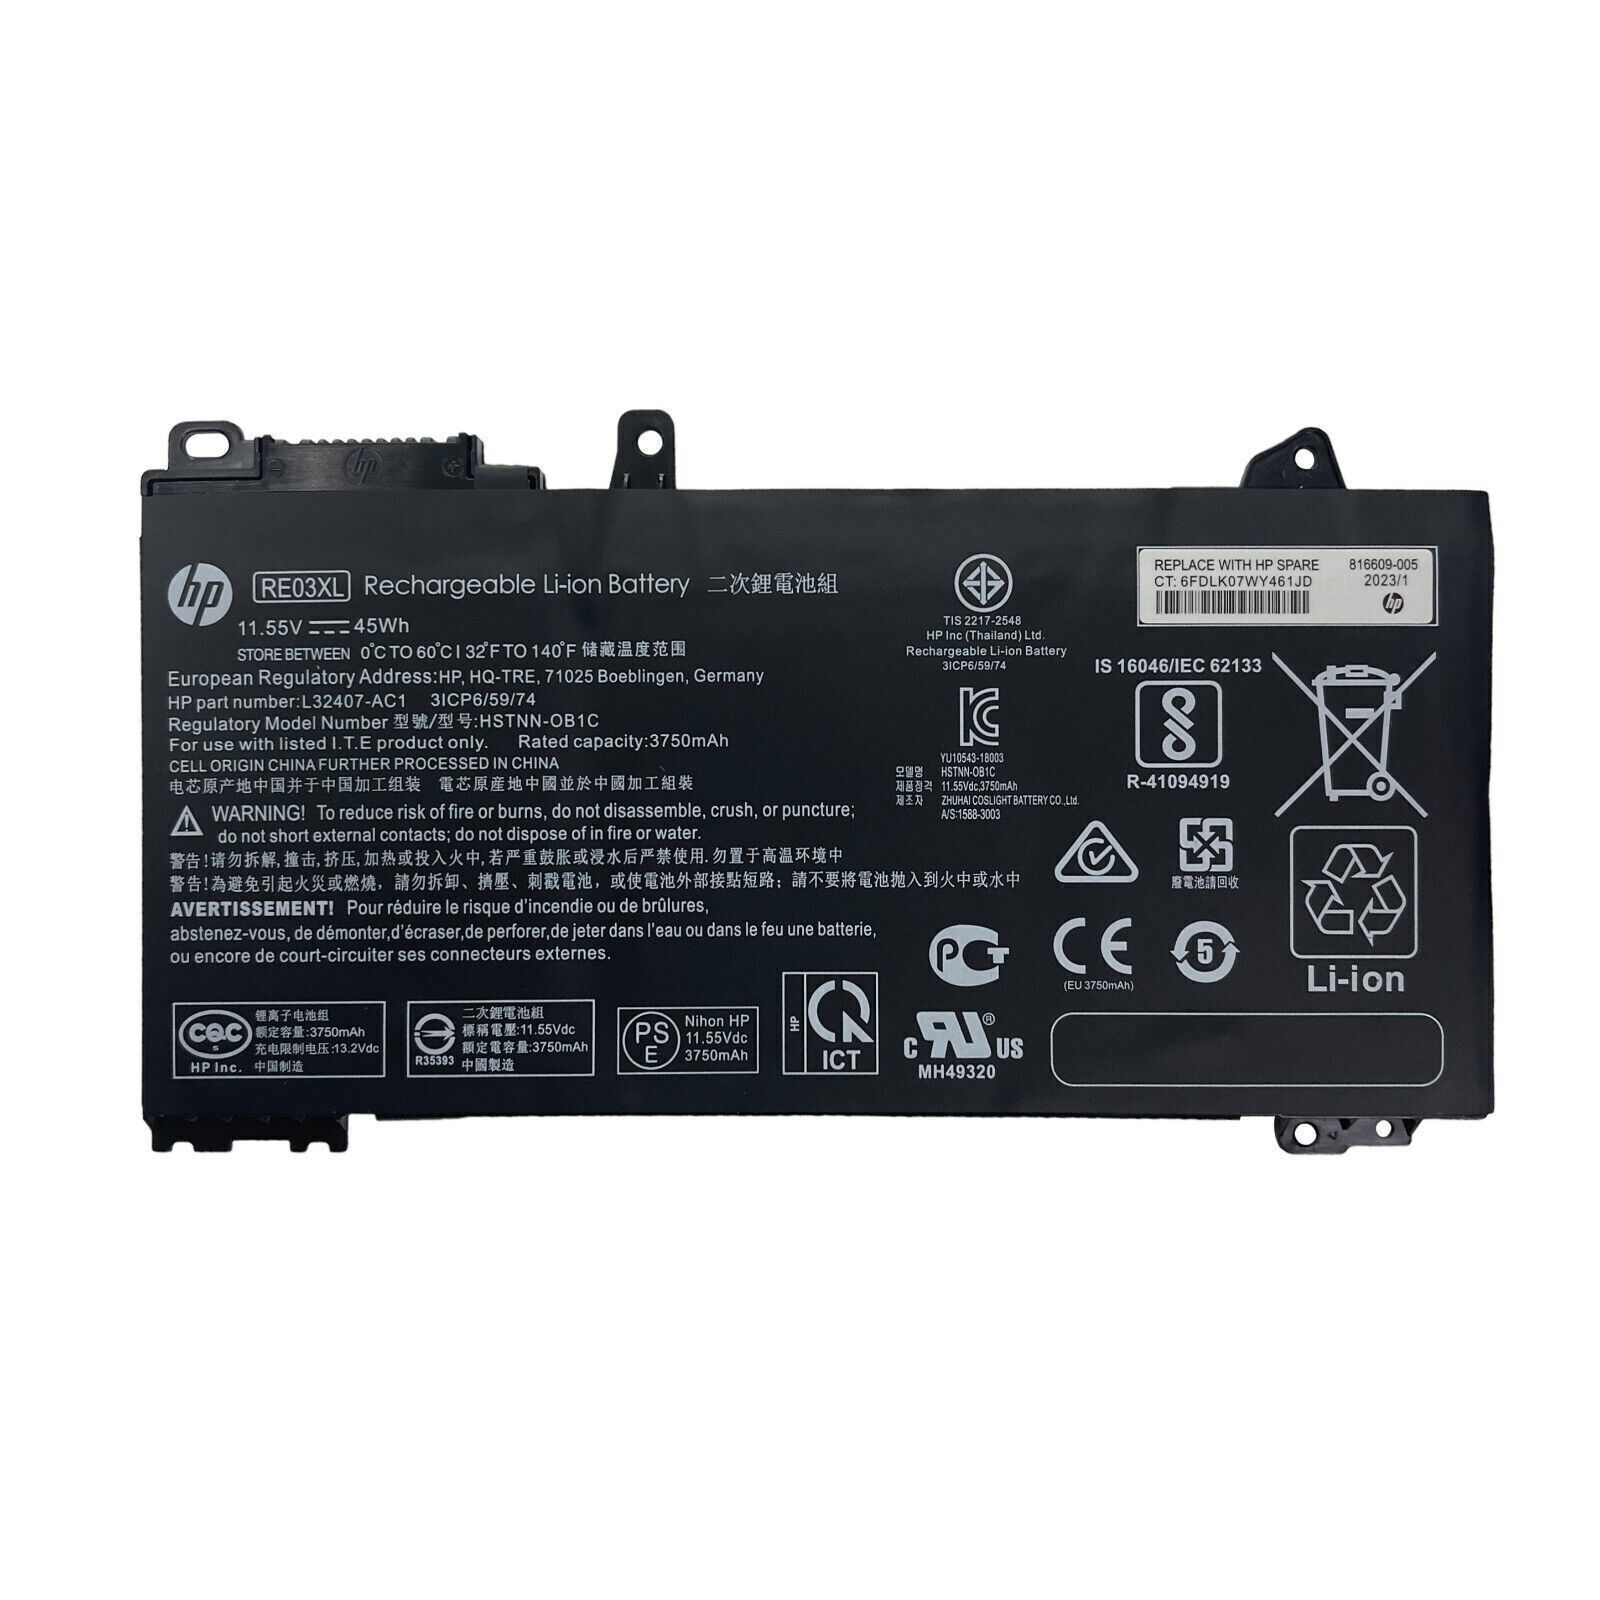 NEW Genuine RE03XL Battery For HP ProBook 430 440 445 450 455 455R G6 L32656-002